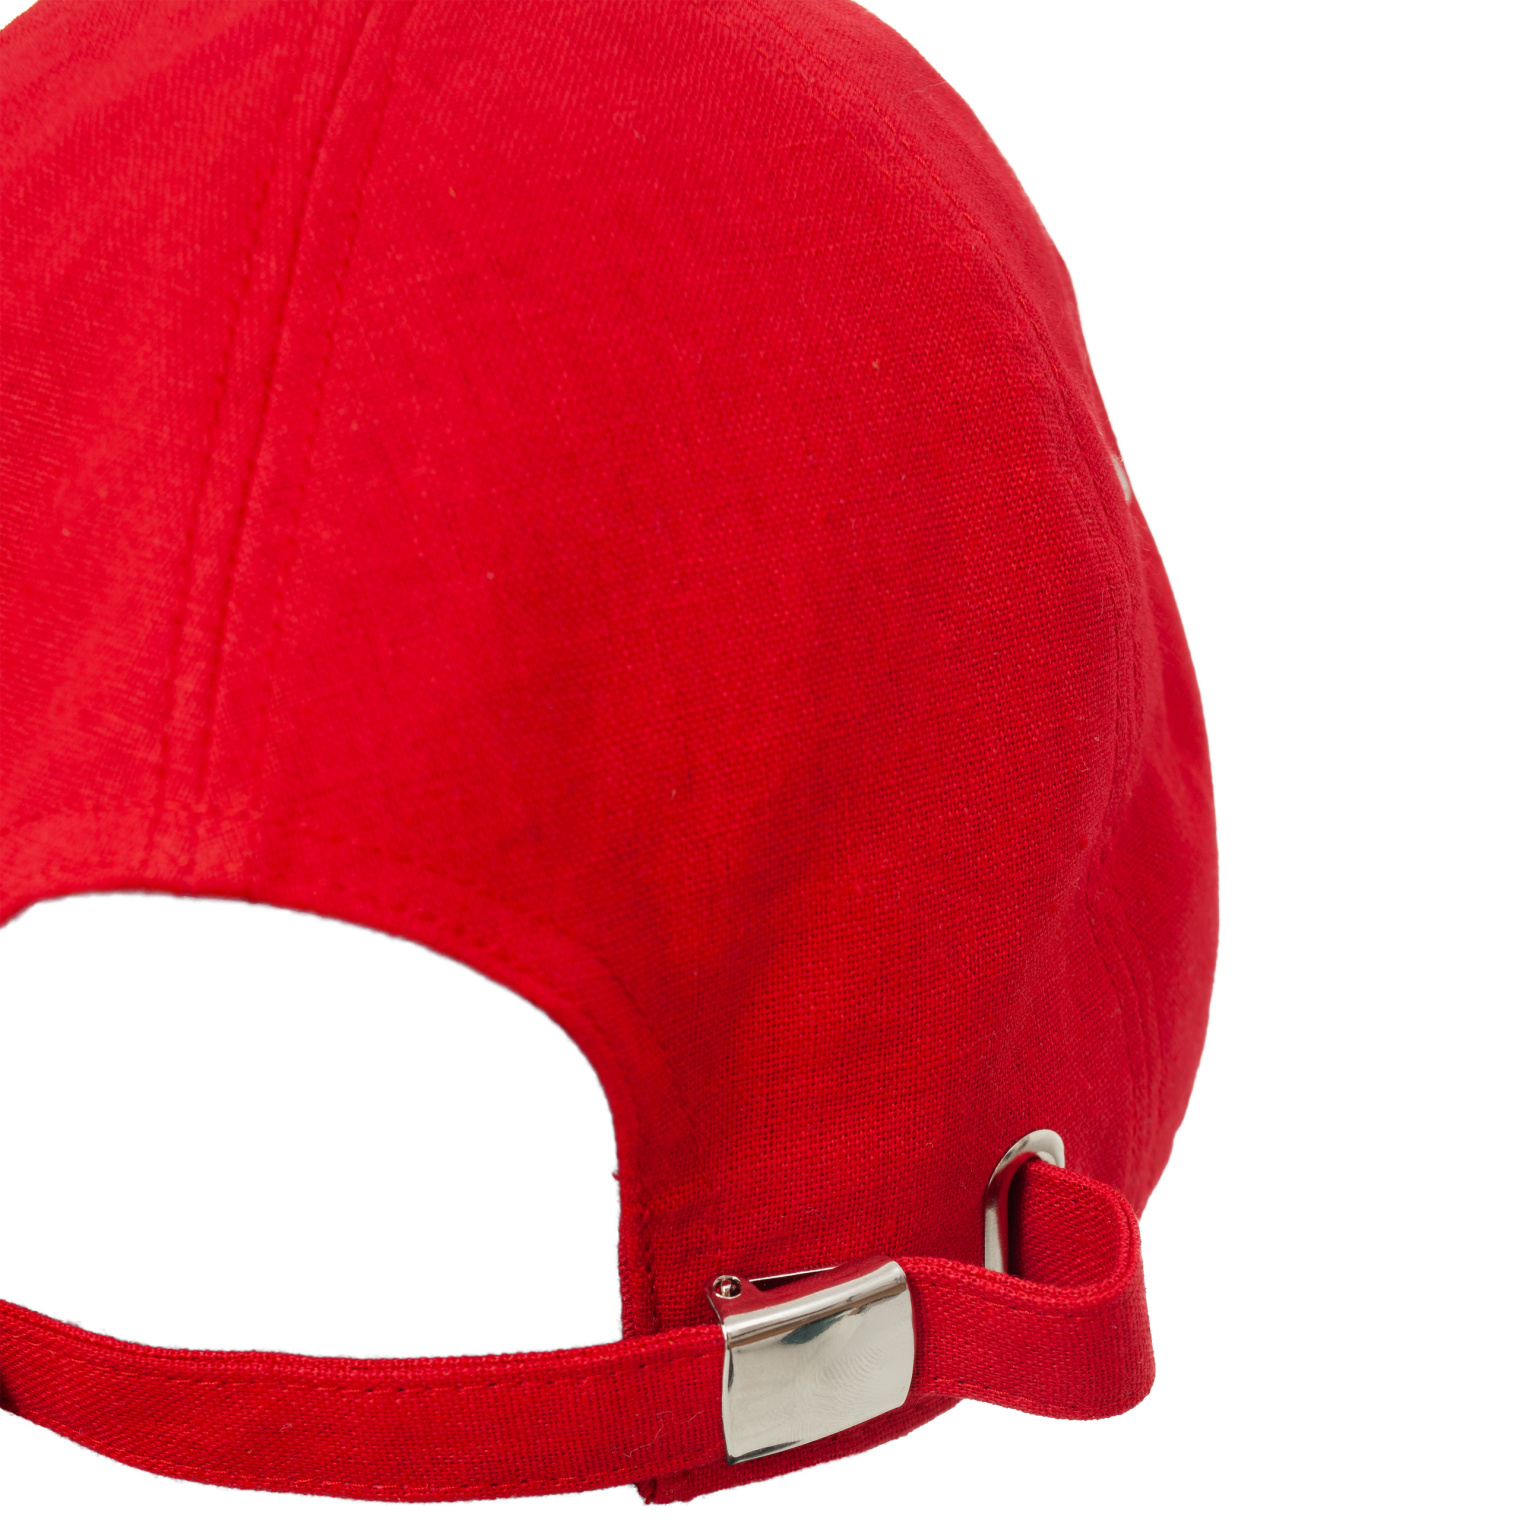 Undercover Red embroidered cap